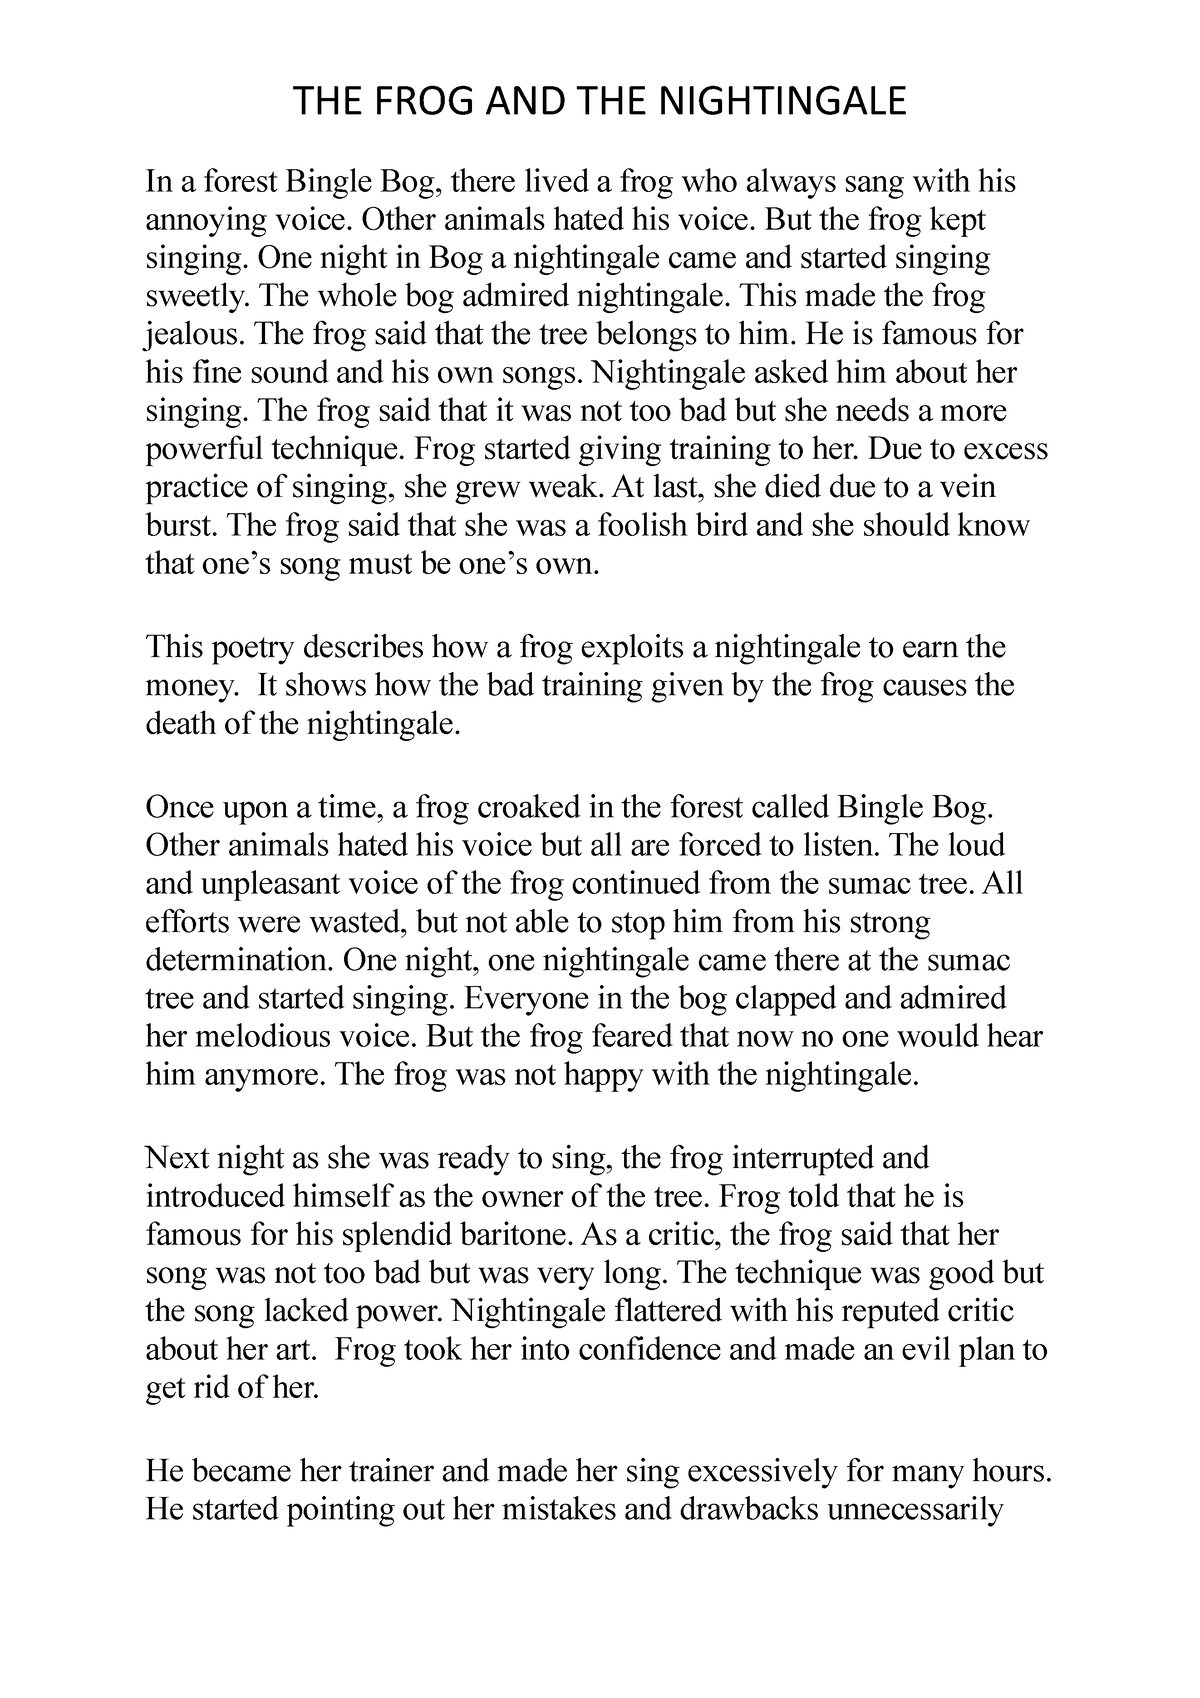 The Frog and the nightingale notes - In a forest Bingle Bog, there ...